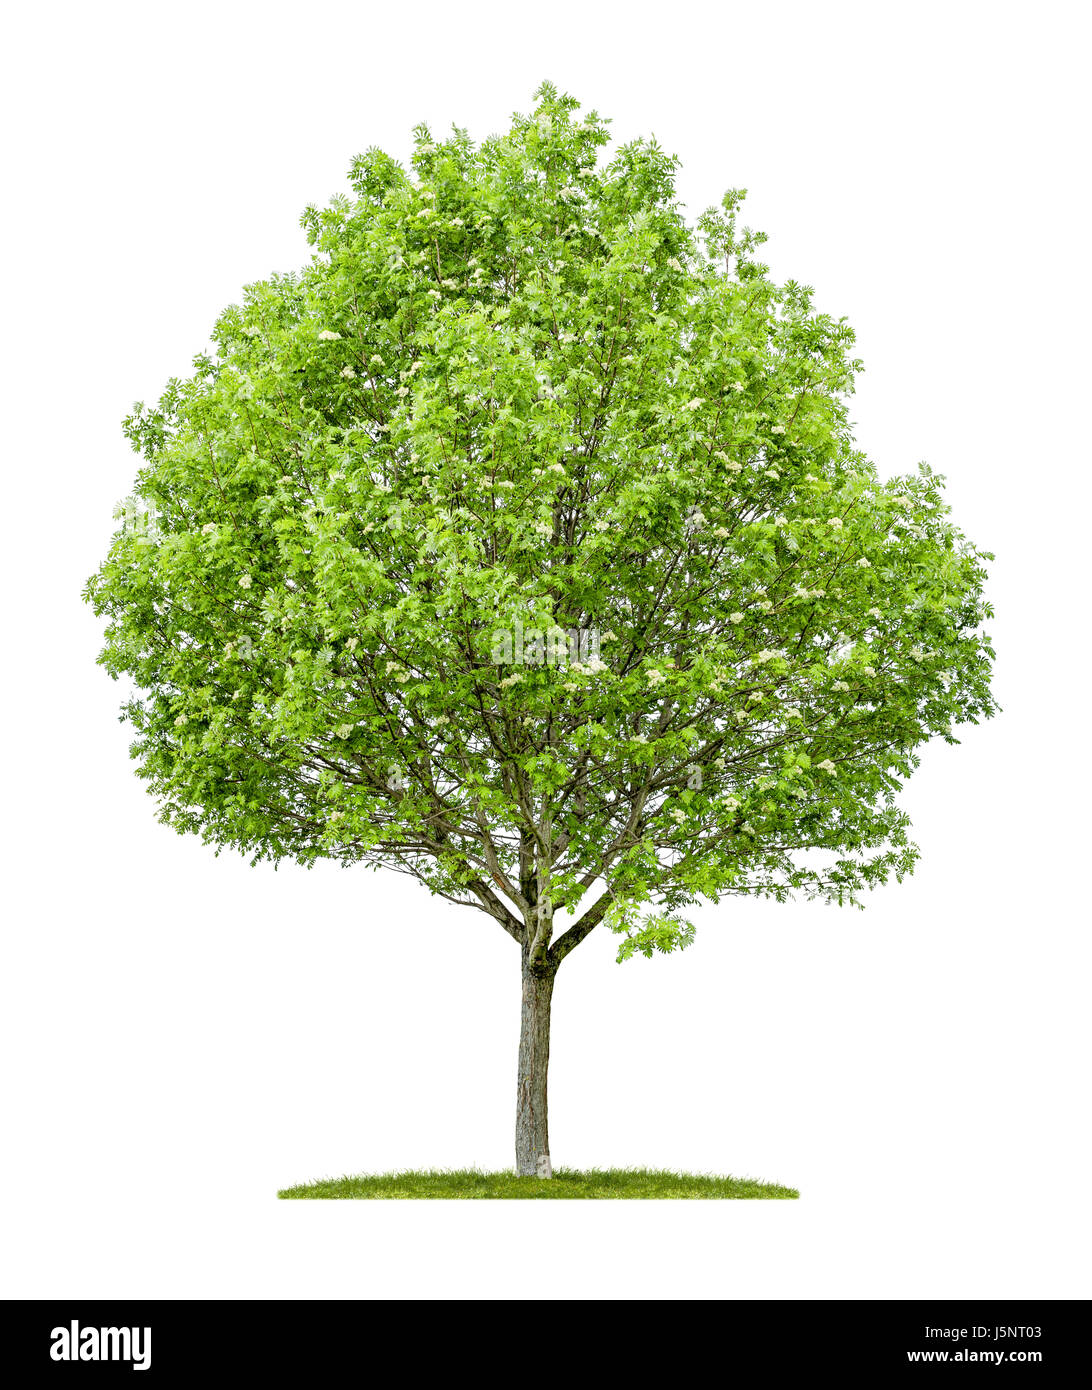 An isolated service tree on a white background Stock Photo